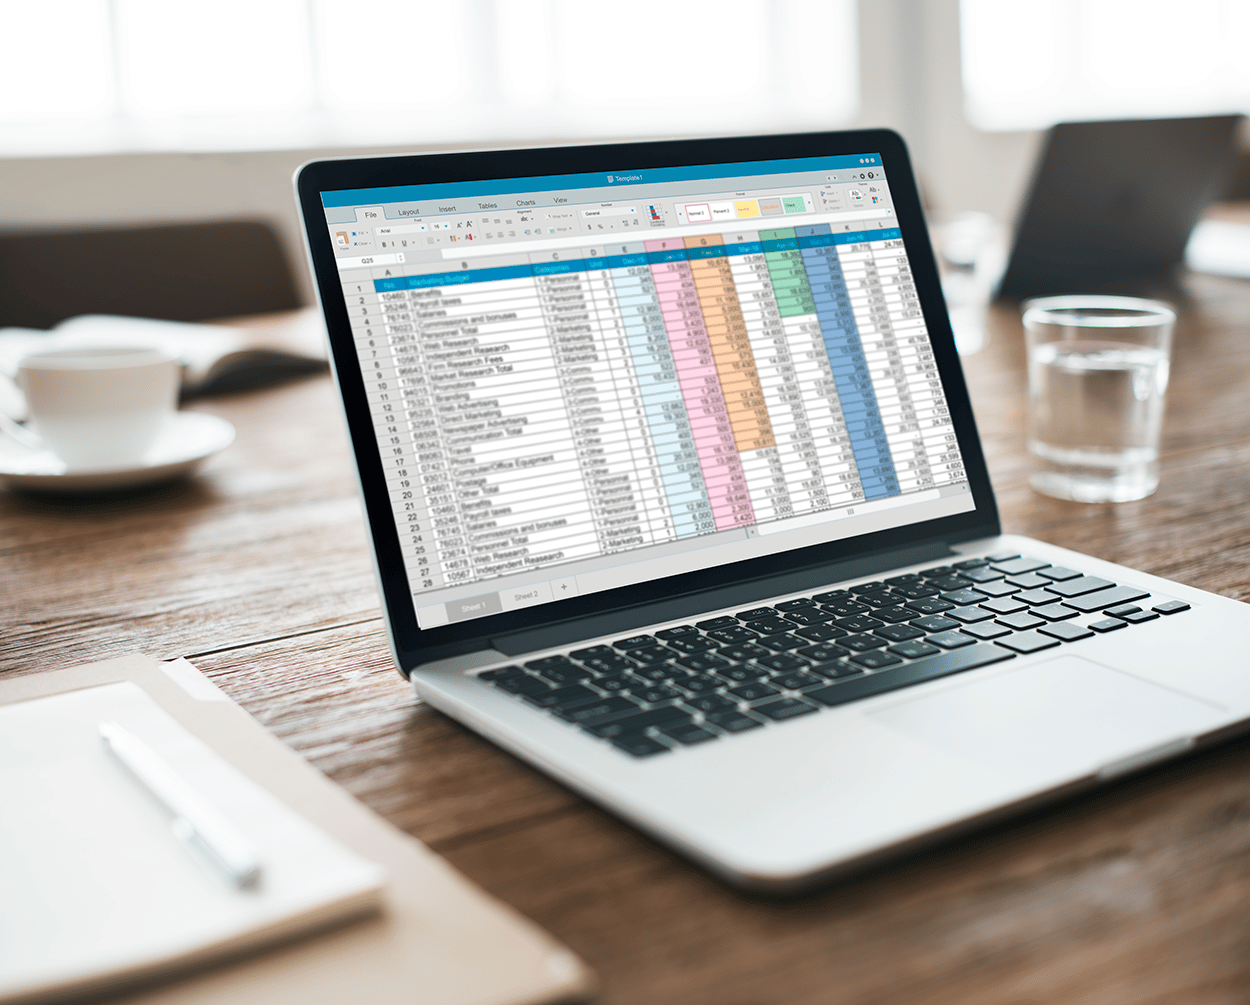 A better alternative to spreadsheets for sales account planning